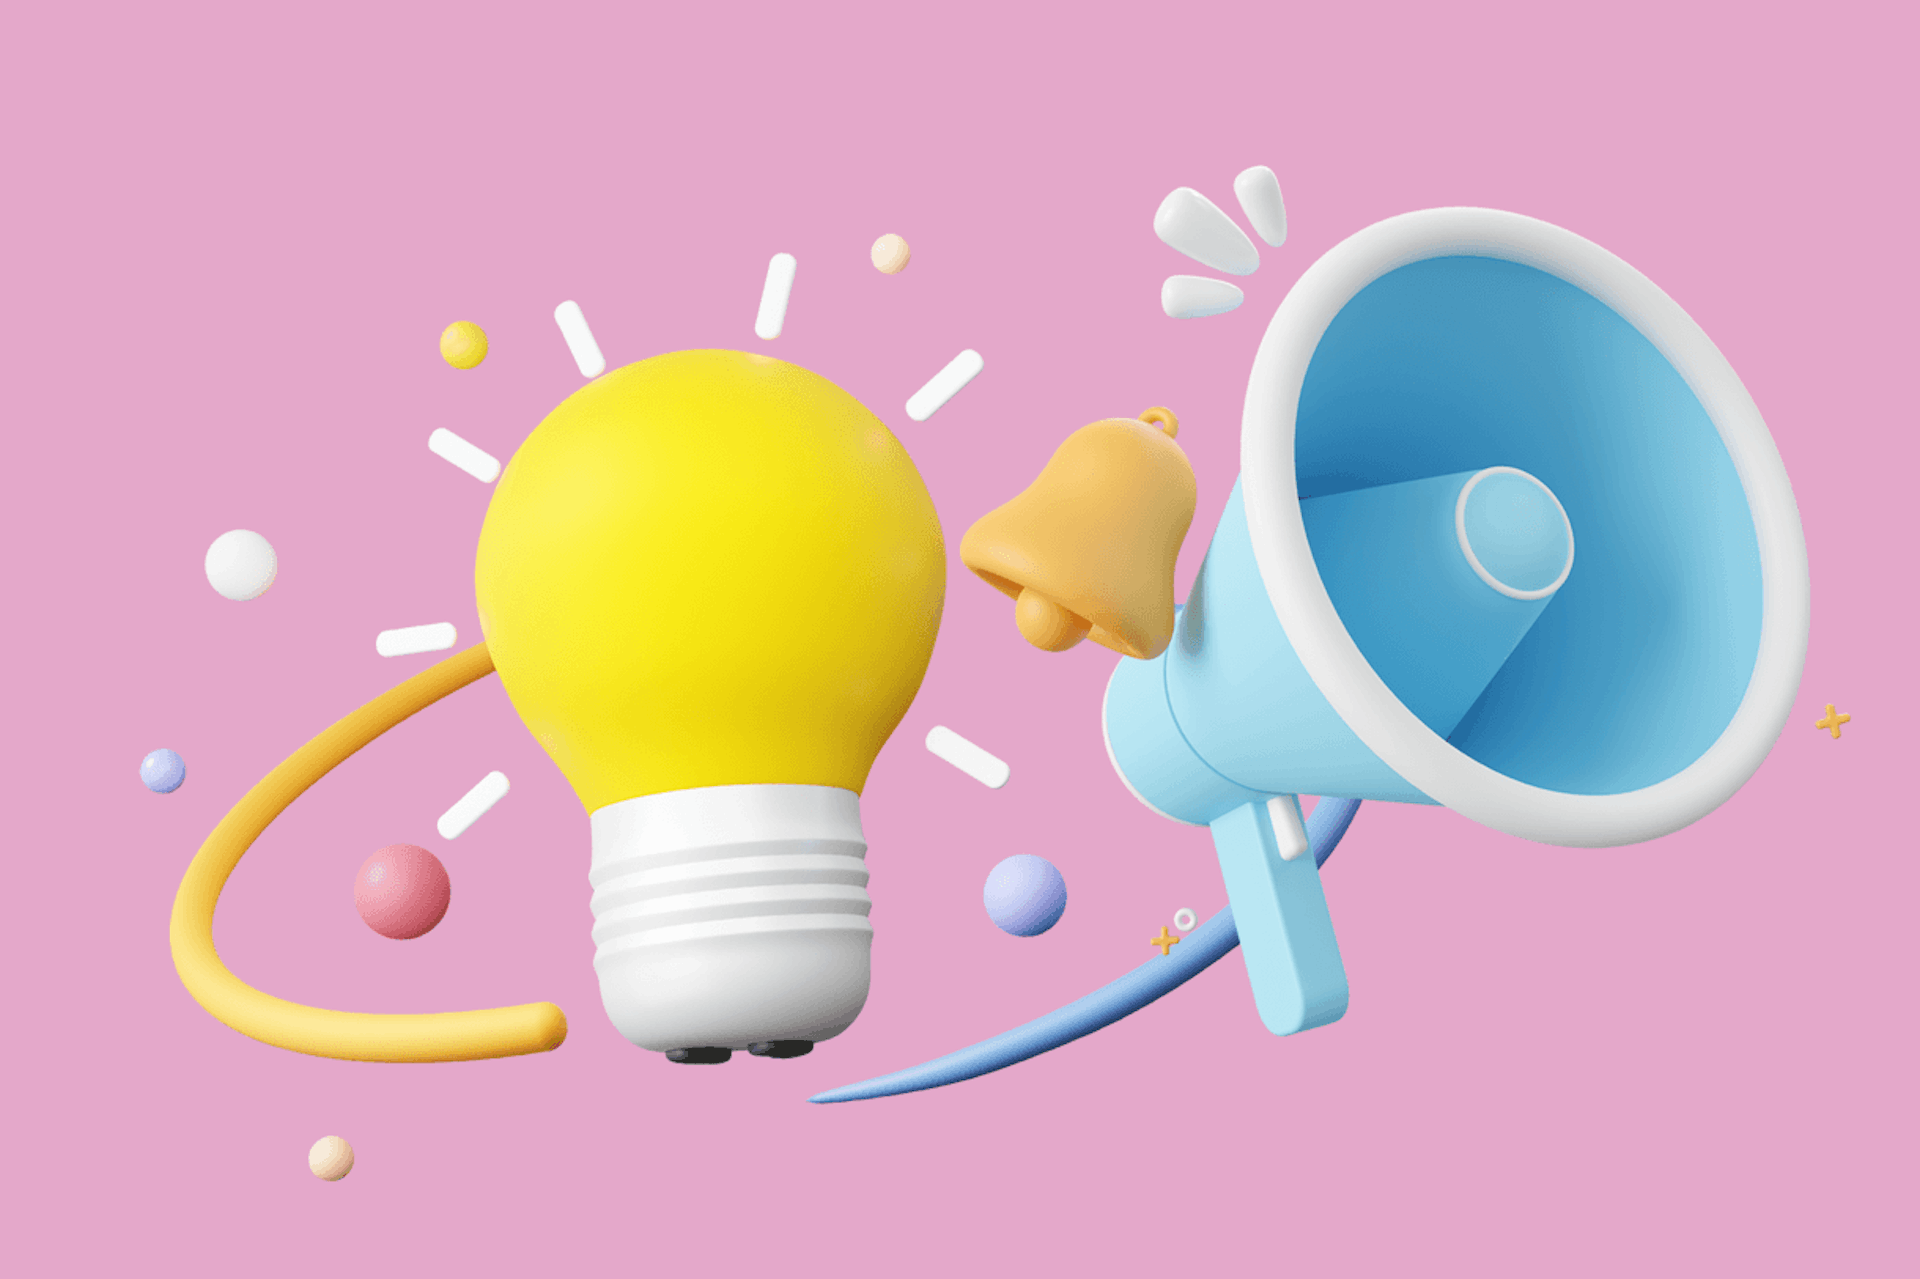 Large yellow light bulb next to a large blue megaphone on a dark pink background. How to create a PR Strategy blog post